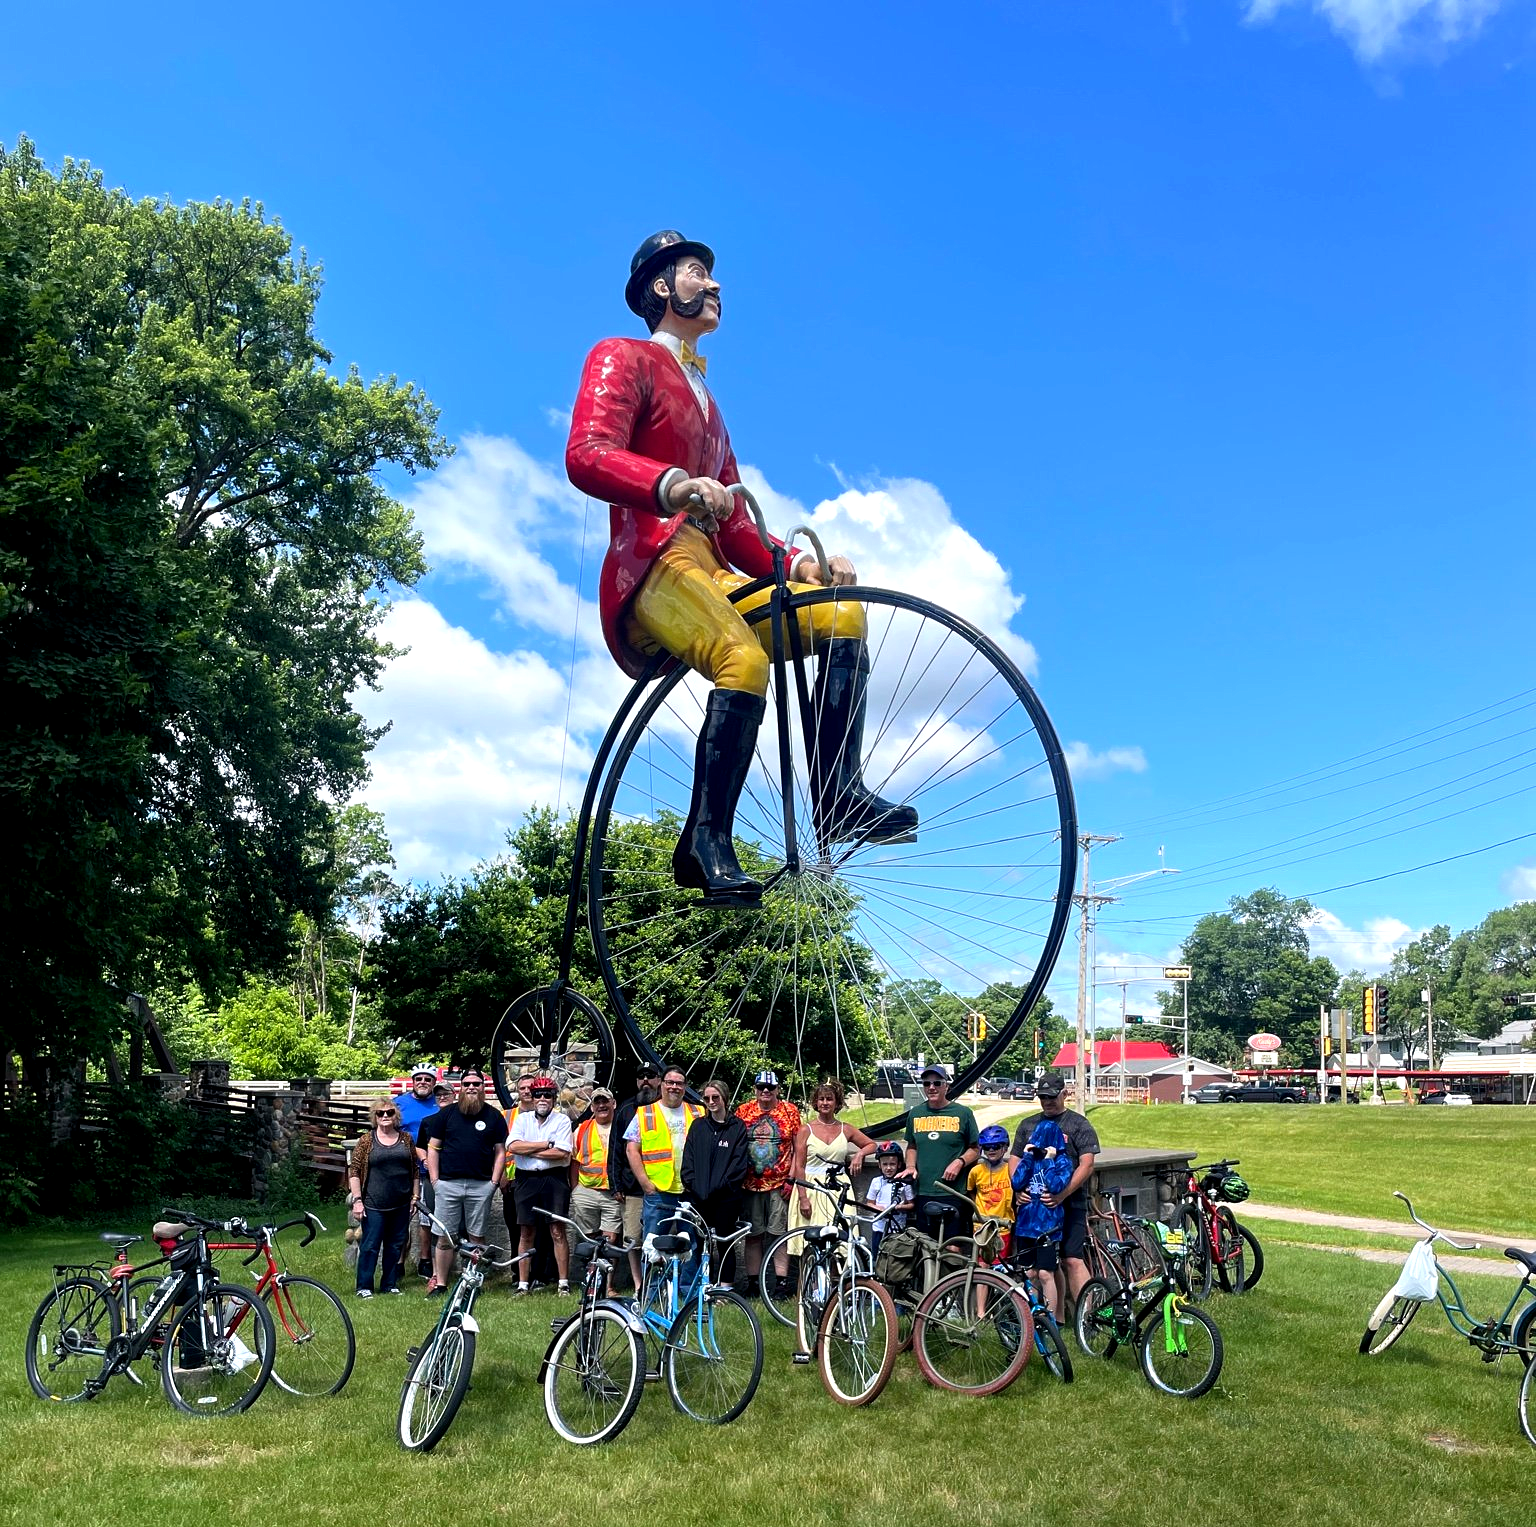 World's Largest Bicyclist: world record set in Sparta, Wisconsin